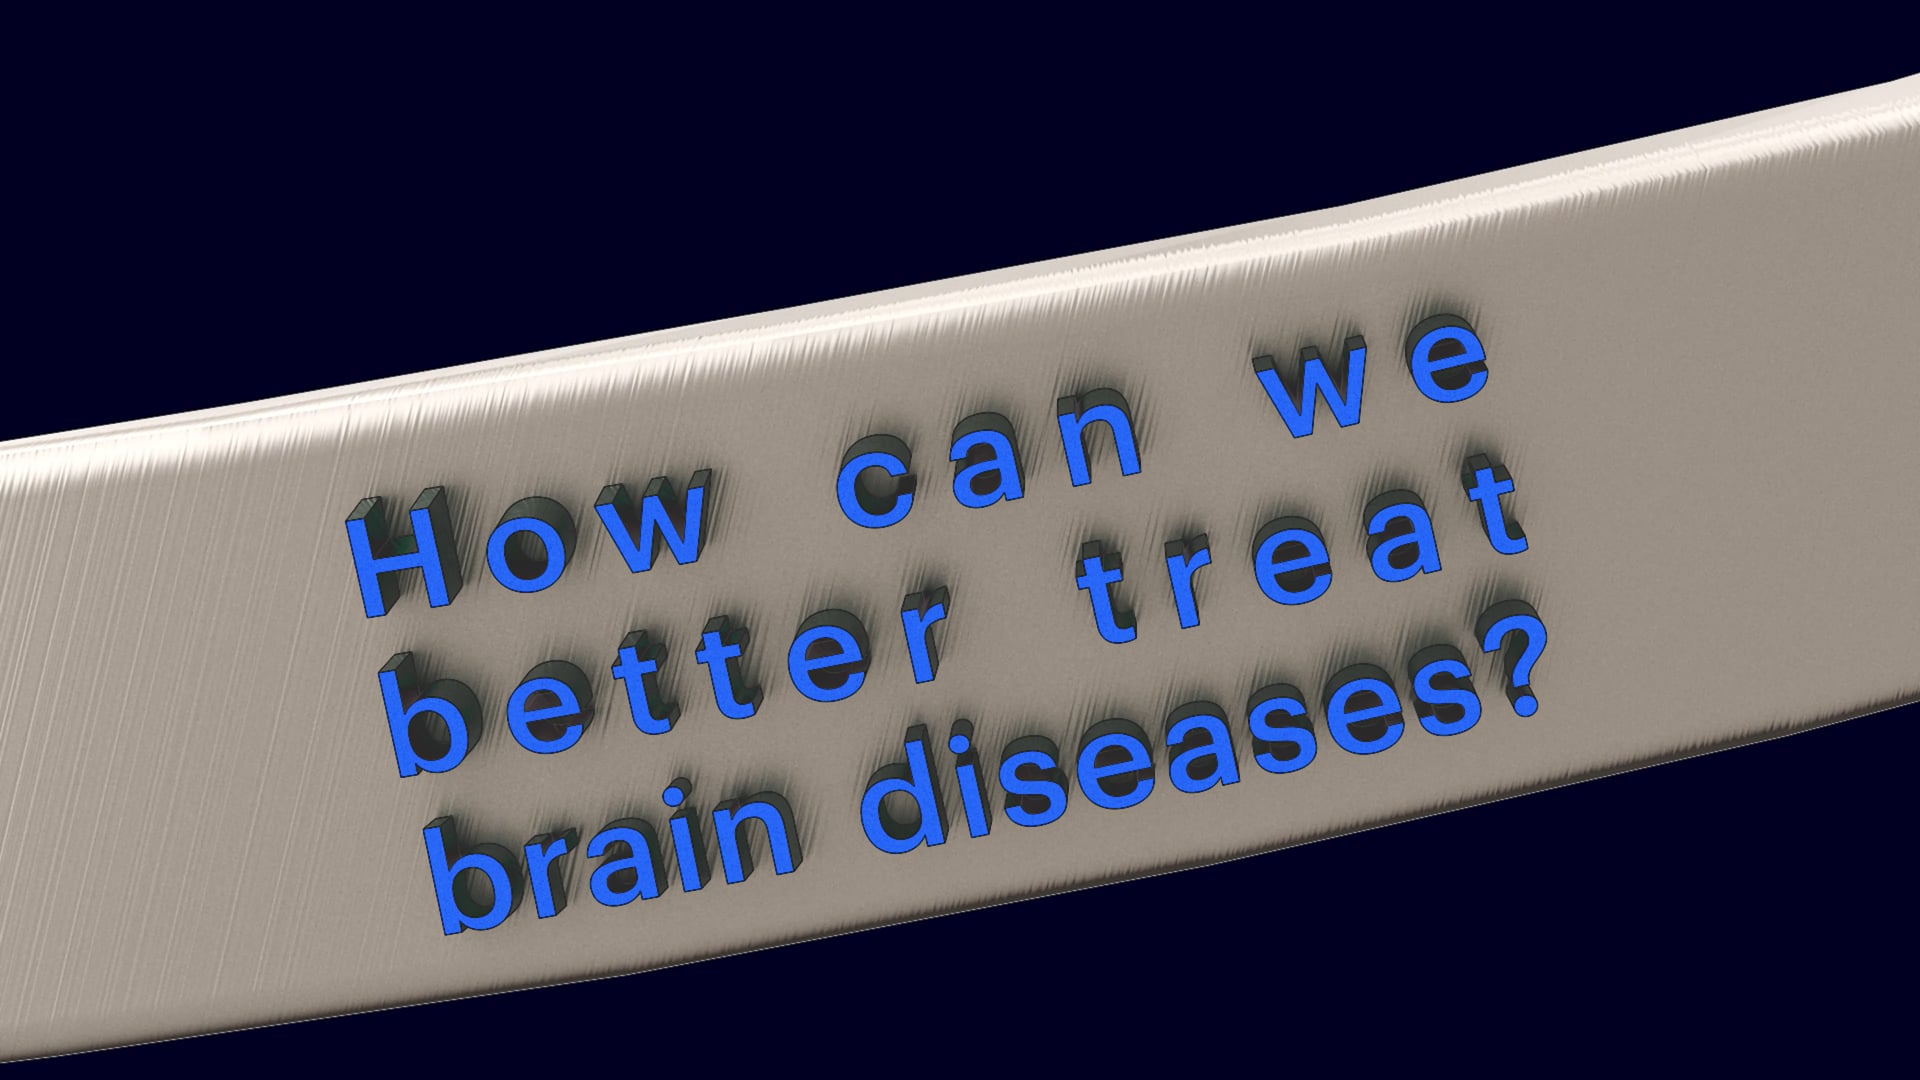 How can we better treat brain diseases?